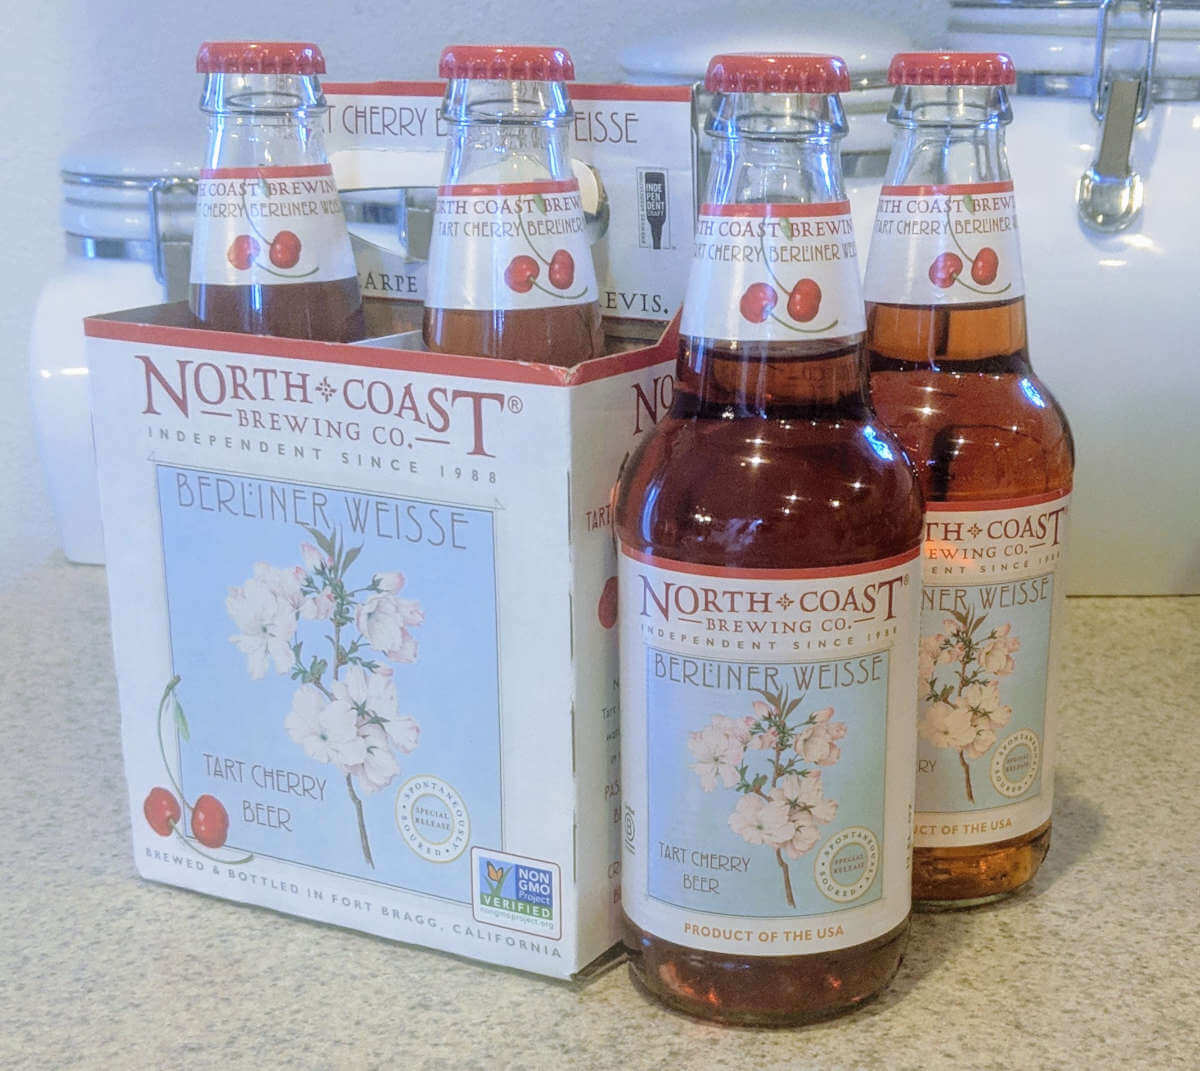 Received: North Coast Tart Cherry, Monkless Curtain Closer